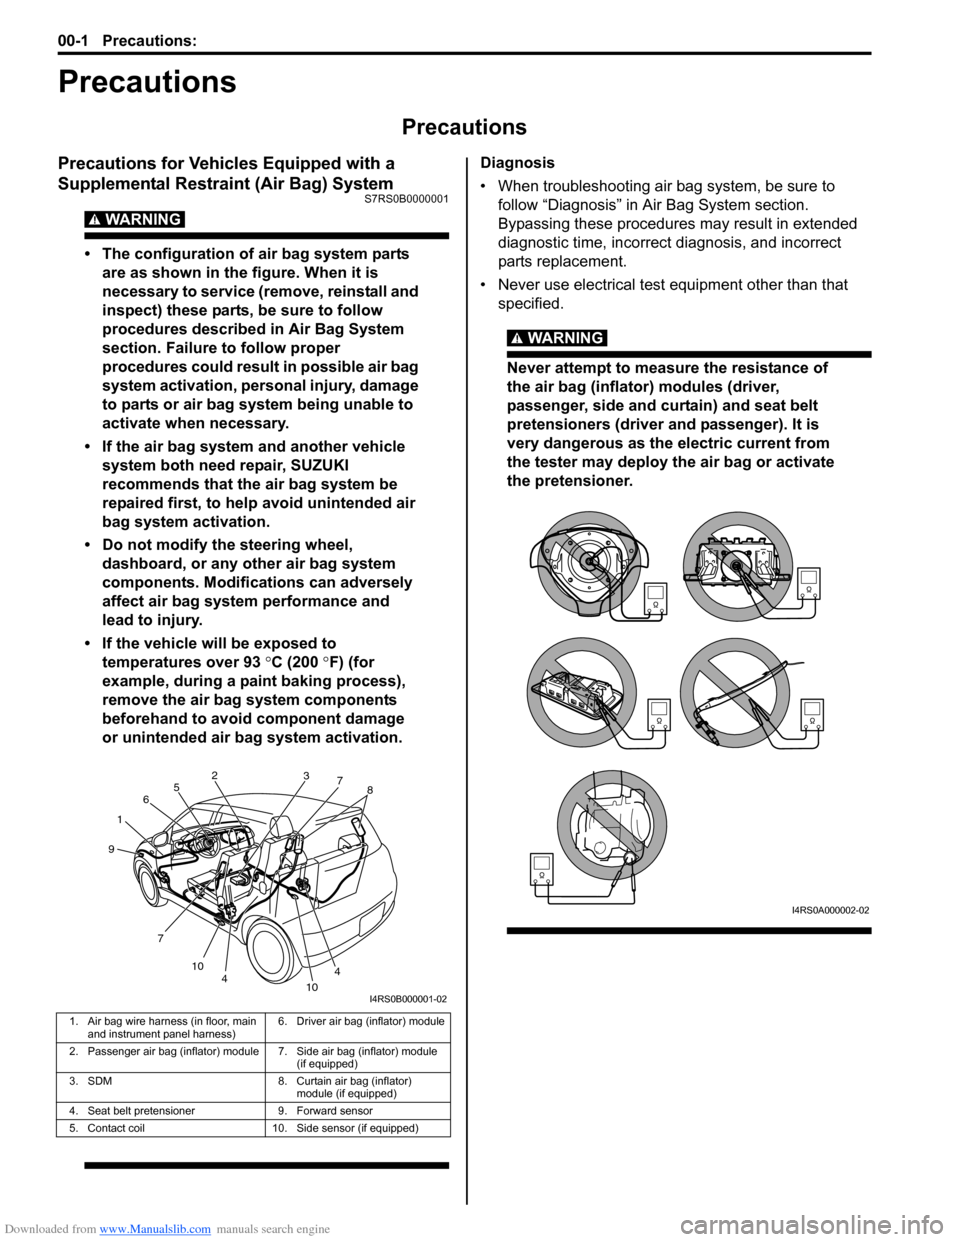 SUZUKI SWIFT 2007 2.G Service Workshop Manual Downloaded from www.Manualslib.com manuals search engine 00-1 Precautions: 
Precautions
Precautions
Precautions
Precautions for Vehicles Equipped with a 
Supplemental Restraint (Air Bag) System
S7RS0B